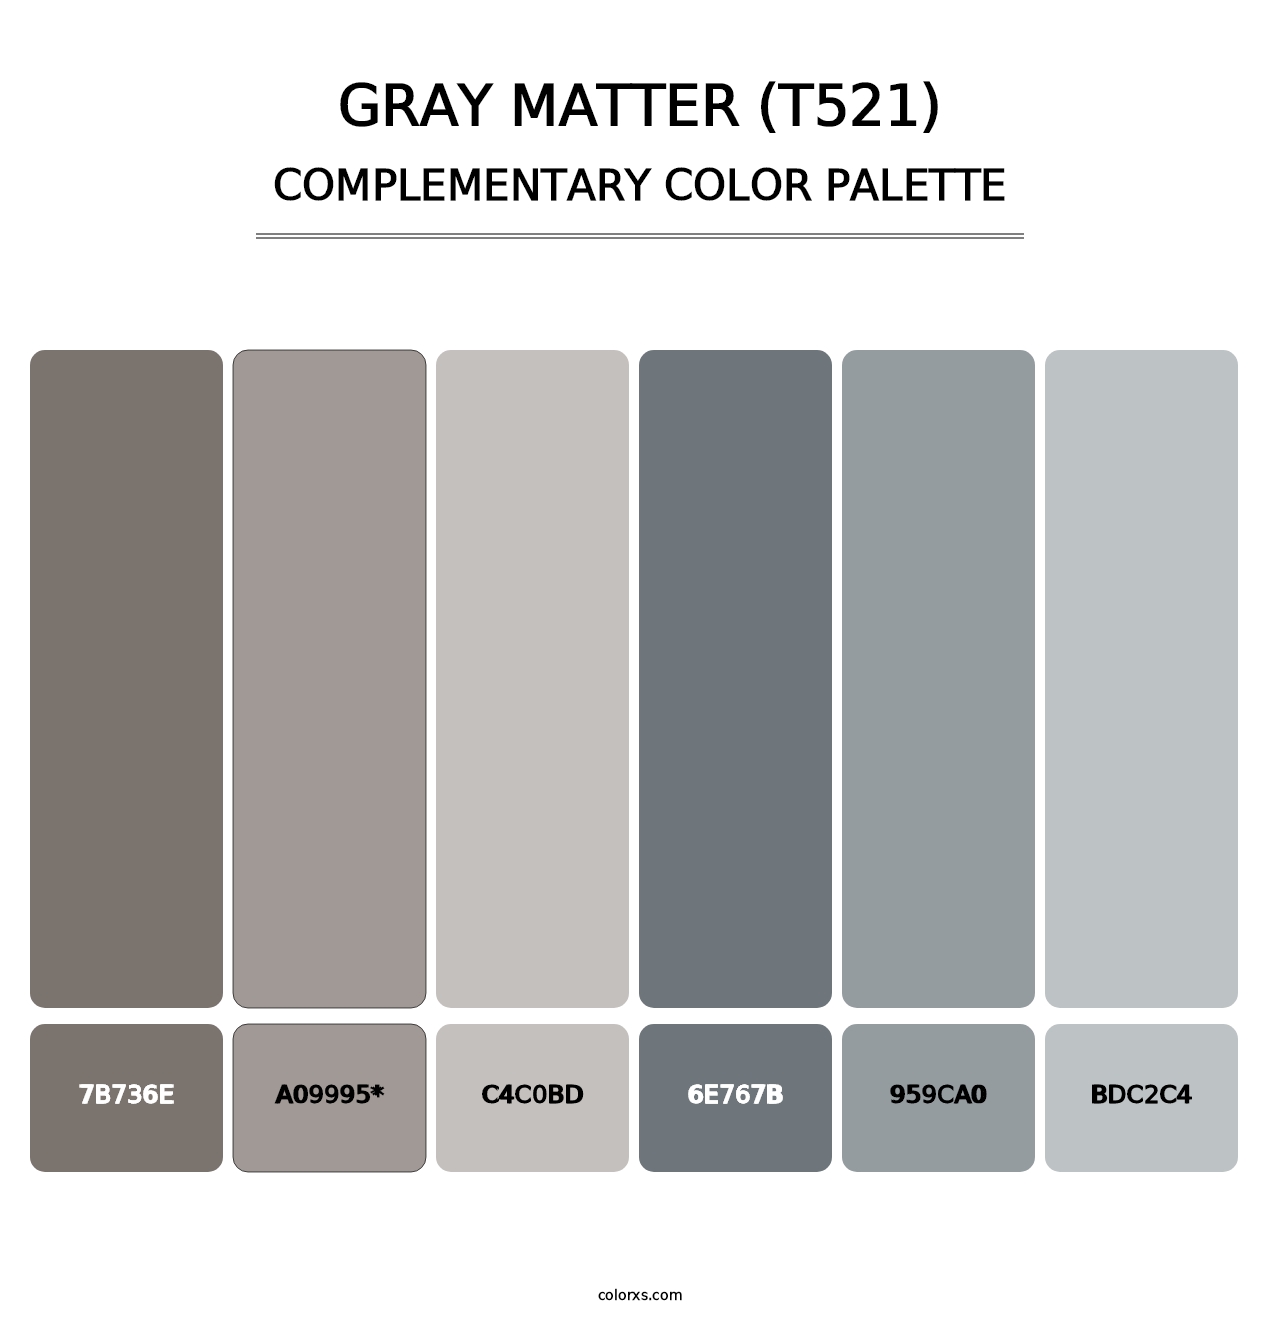 Gray Matter (T521) - Complementary Color Palette